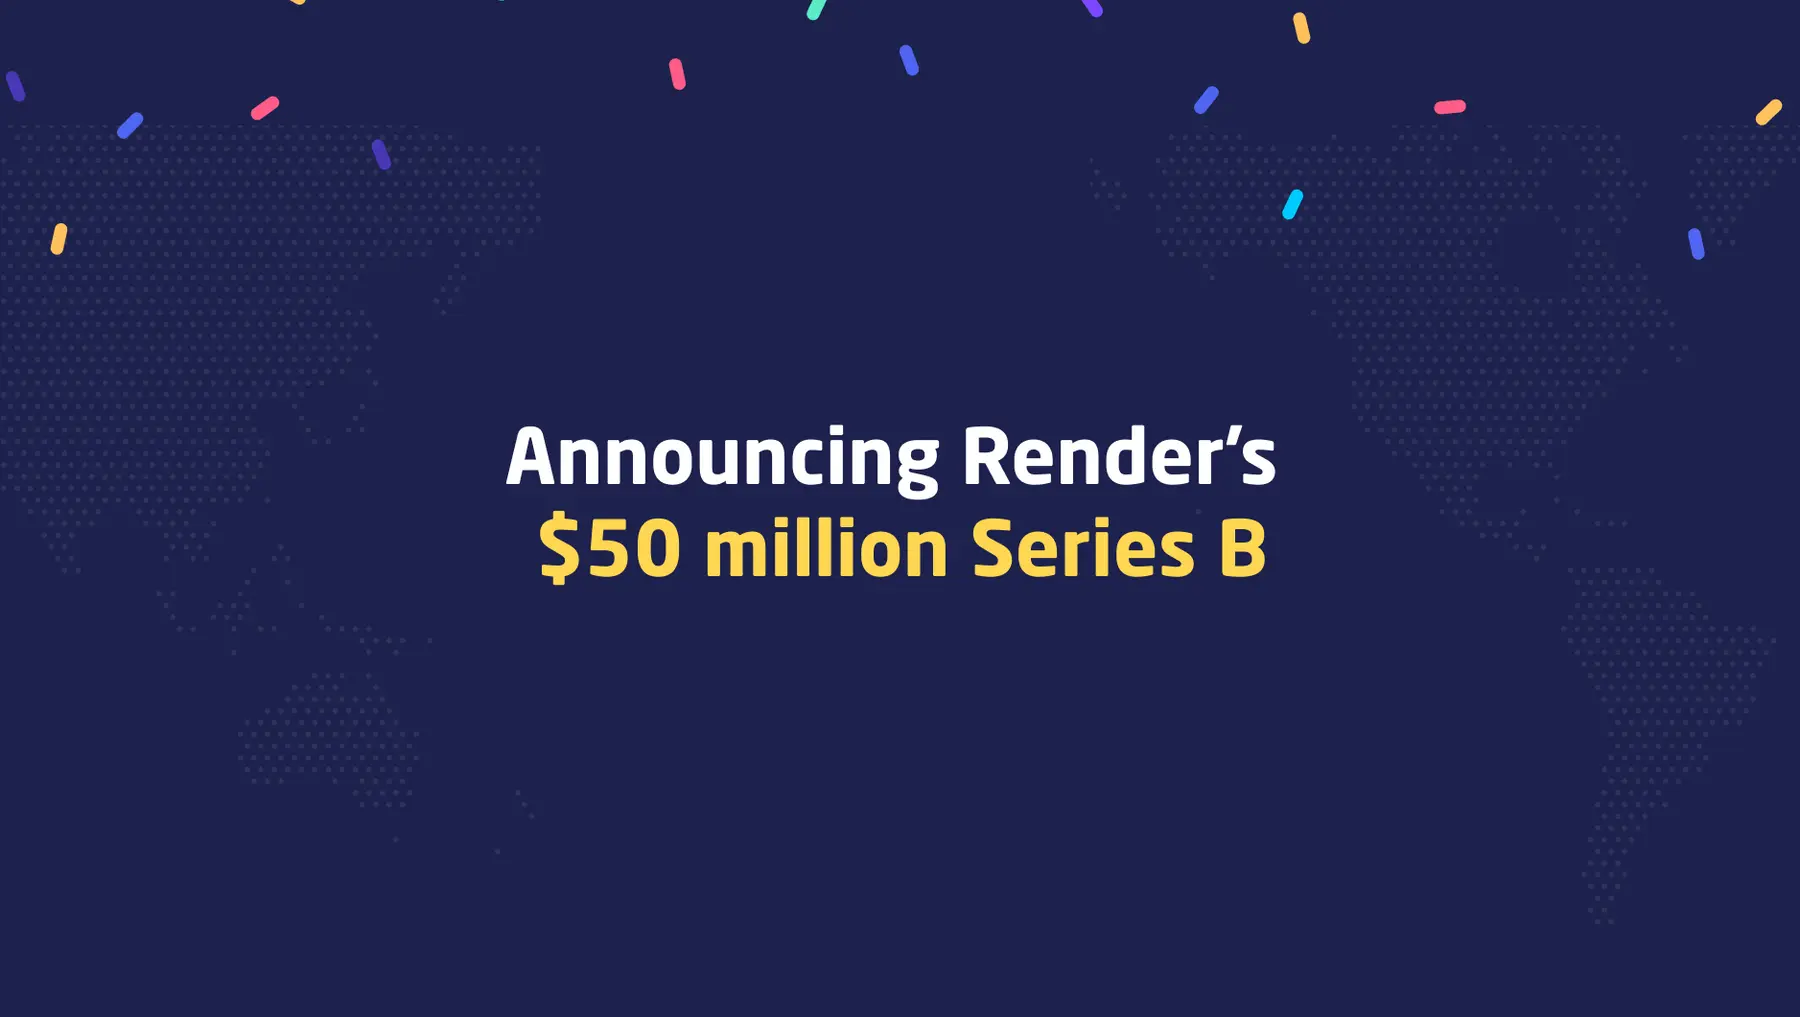 Render raises $50 Million in new funding to build the new cloud